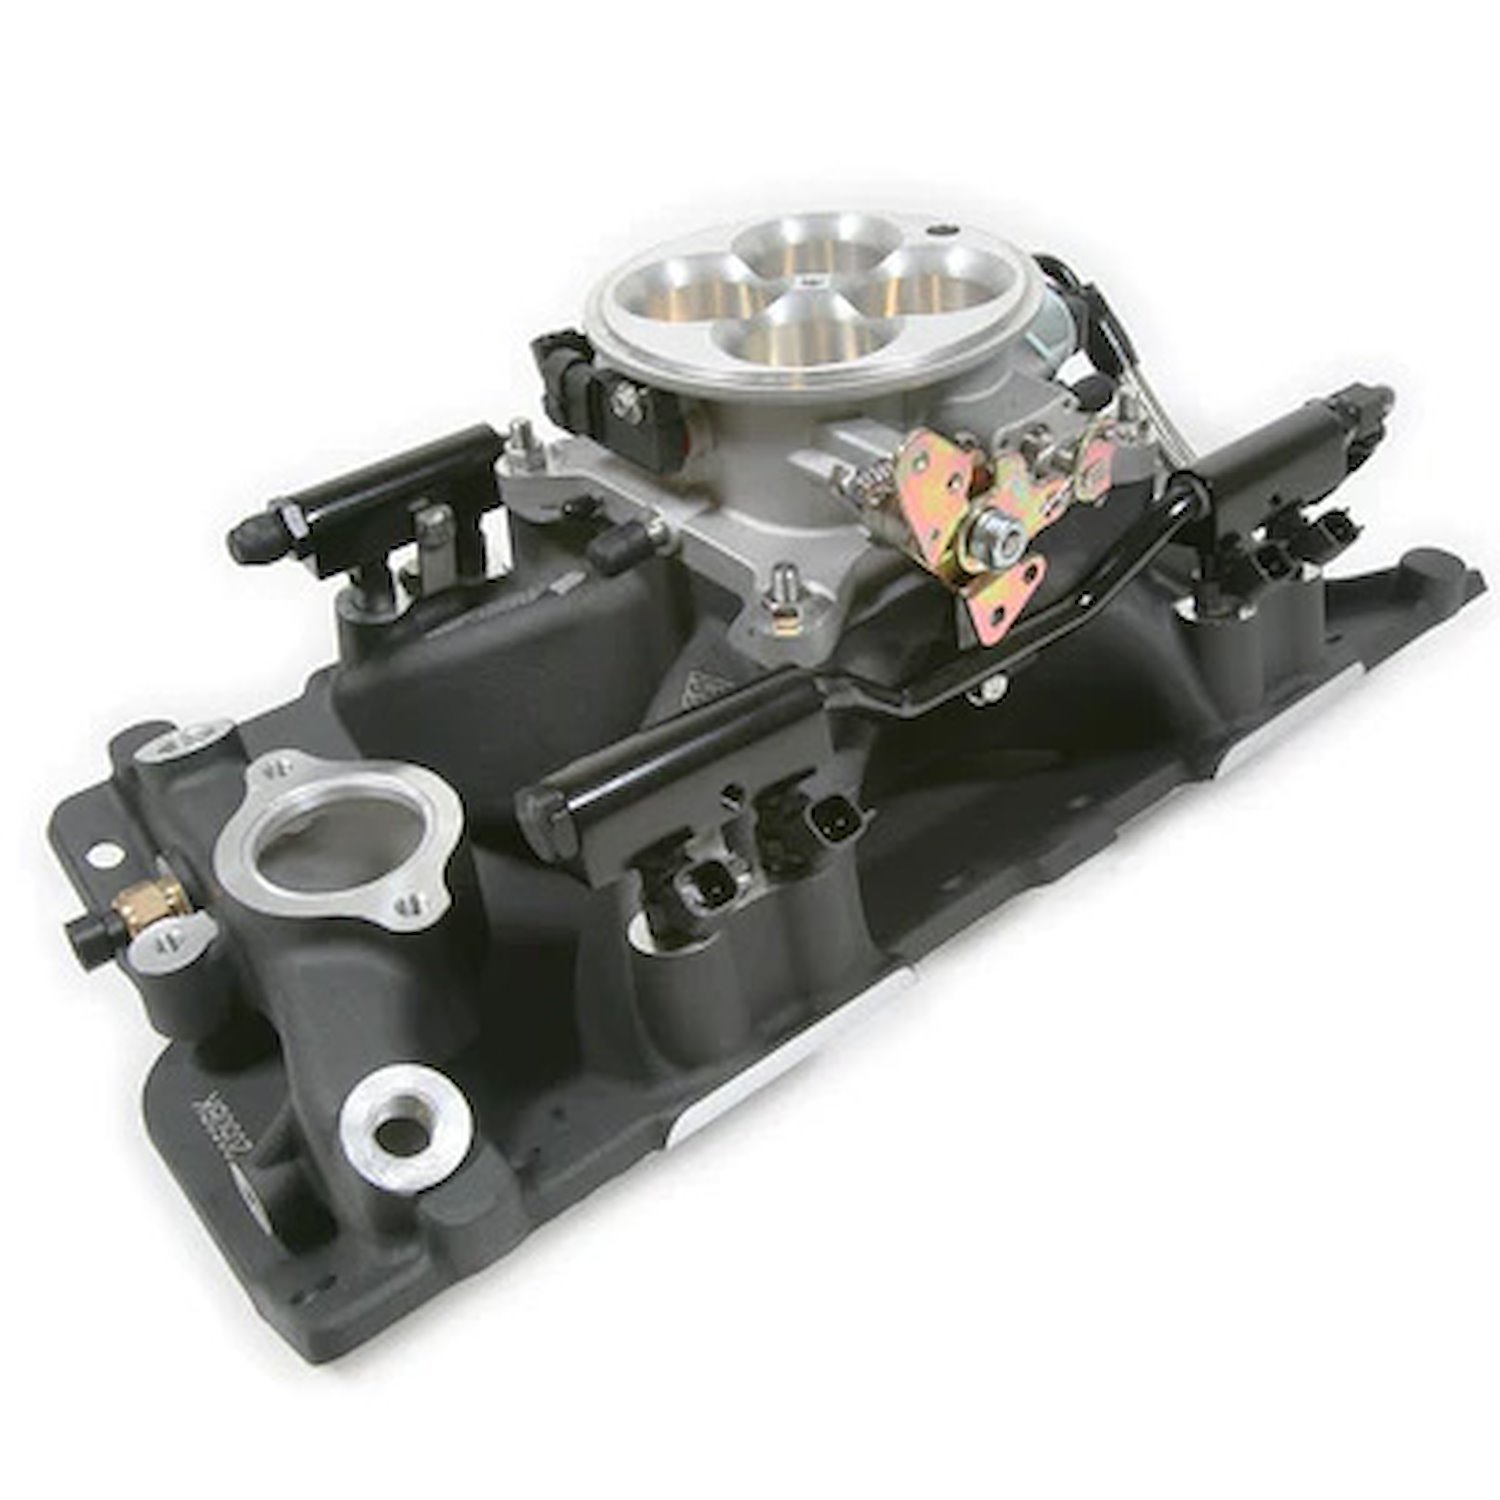 AS2015P-SBF-B2070 The Joker EFI Standalone Management System, Small Block Ford, with Black AM2070 Intake Manifold